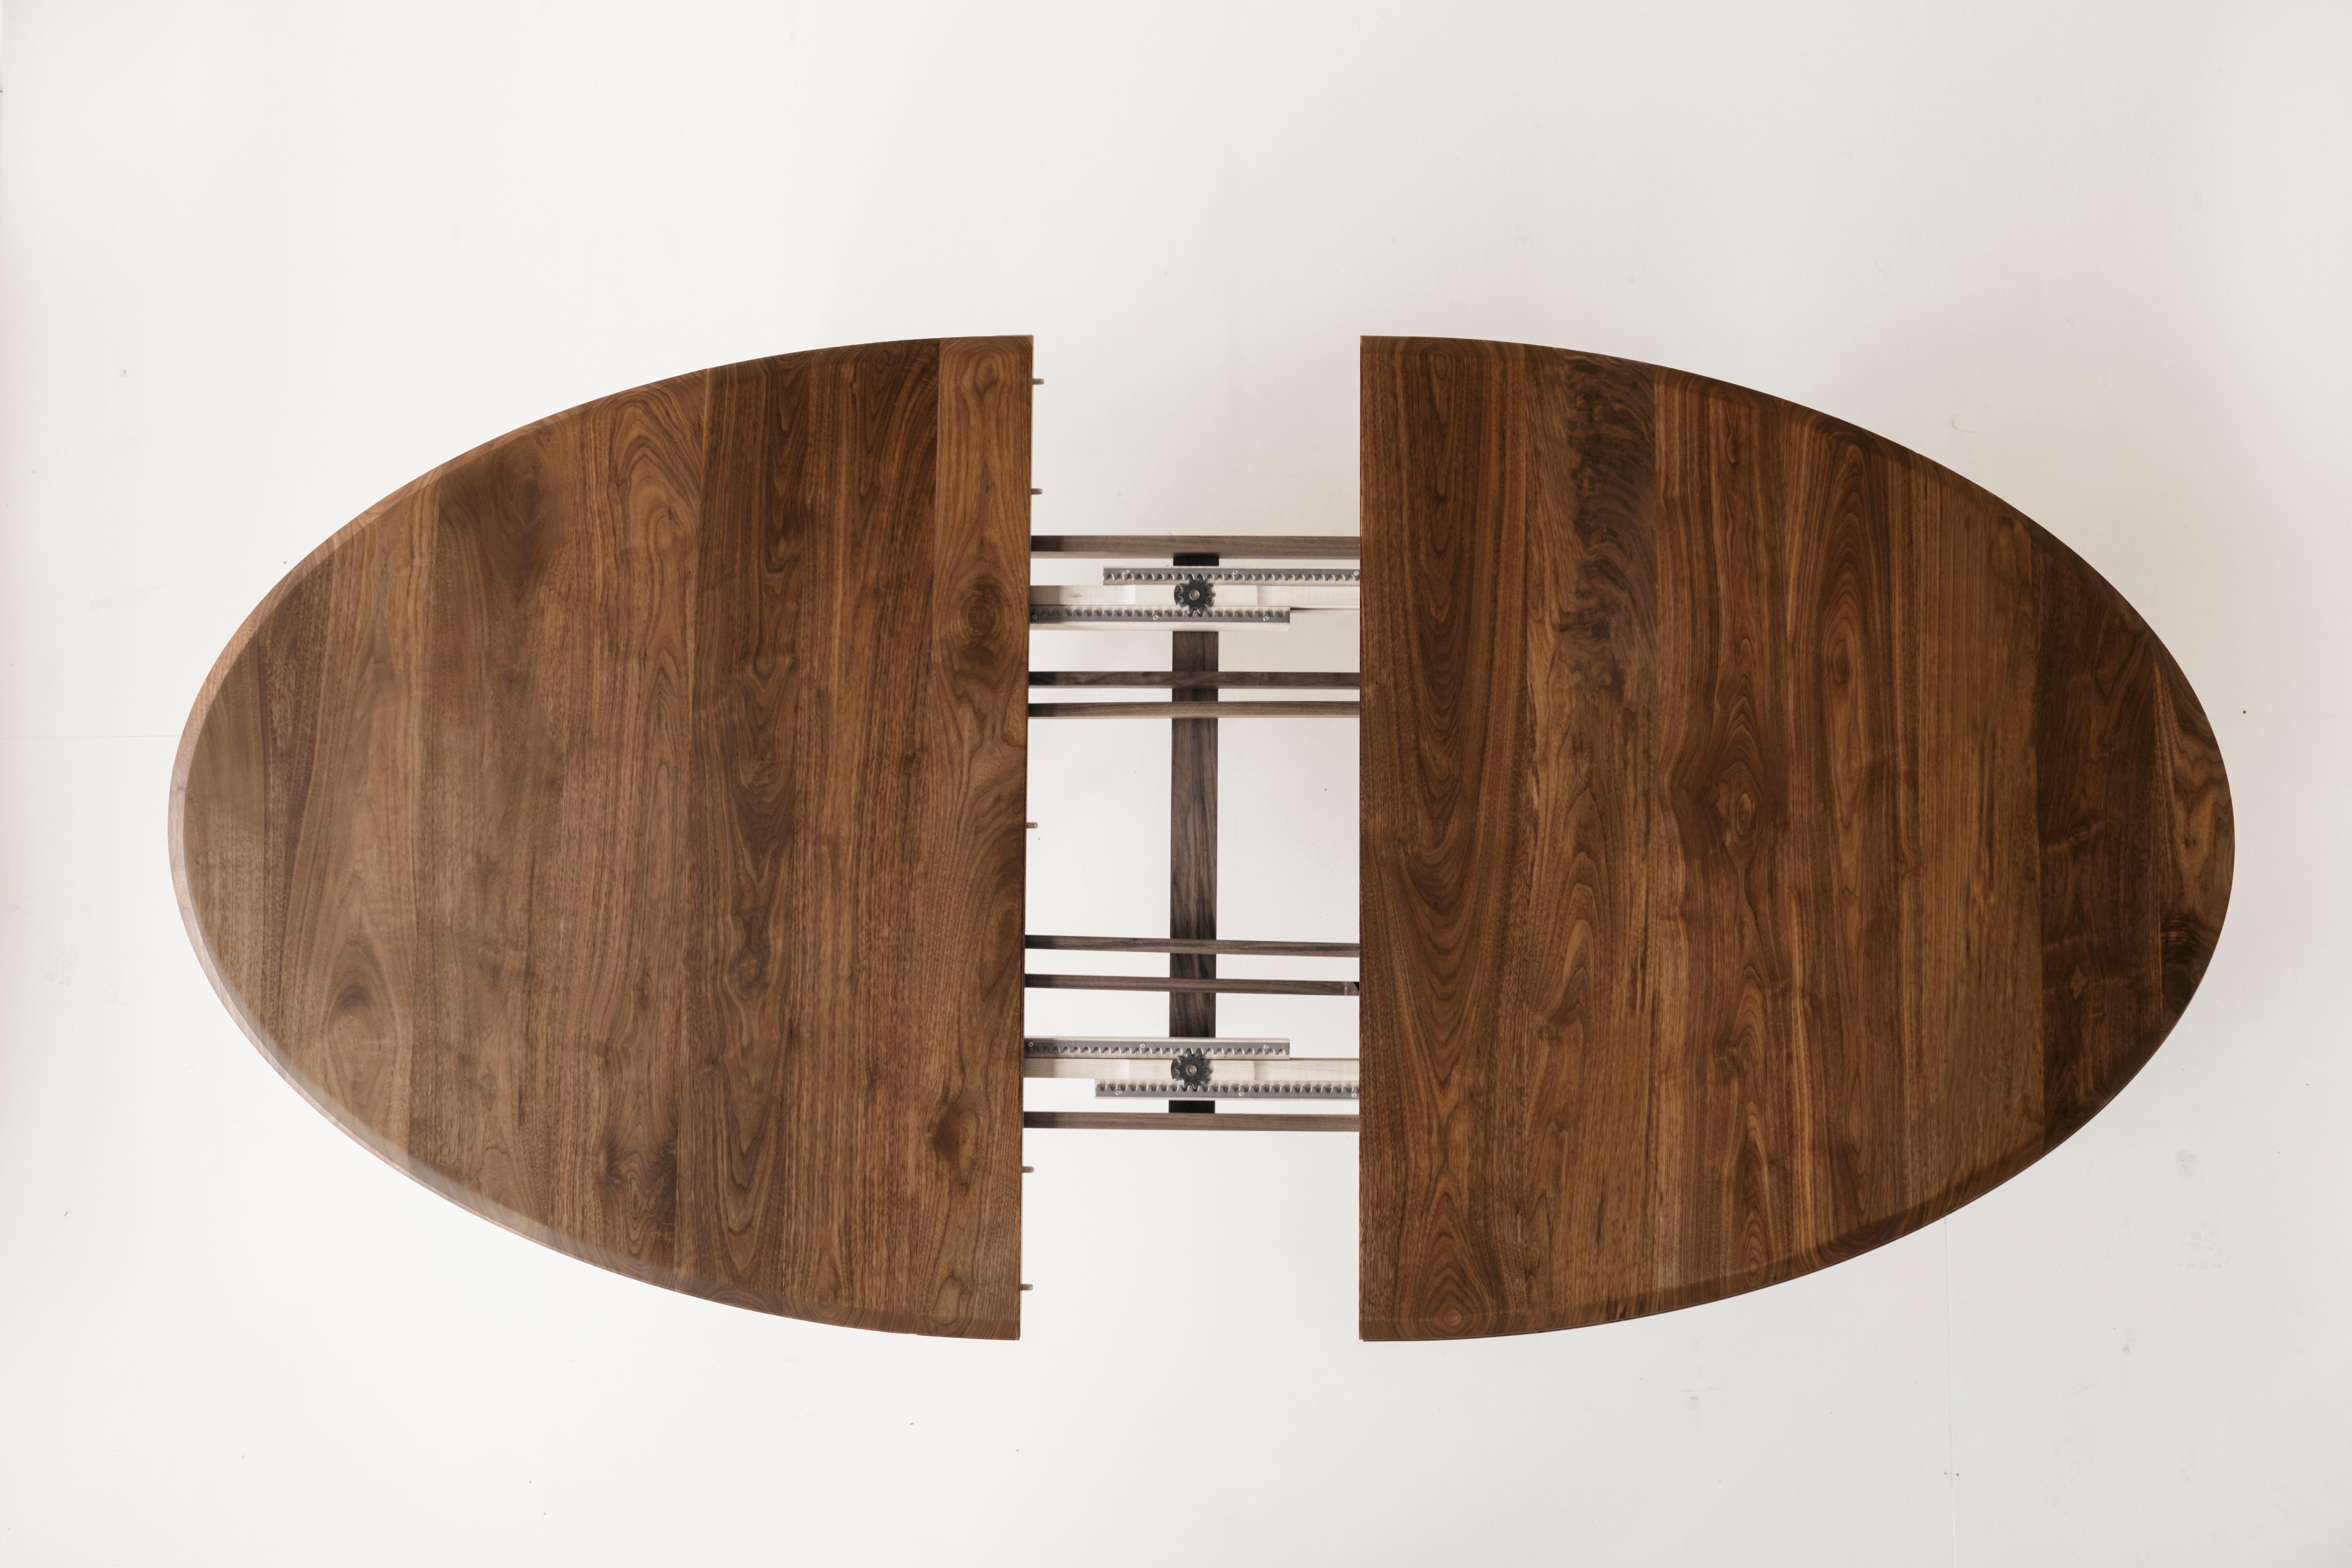 oval dining table extendable